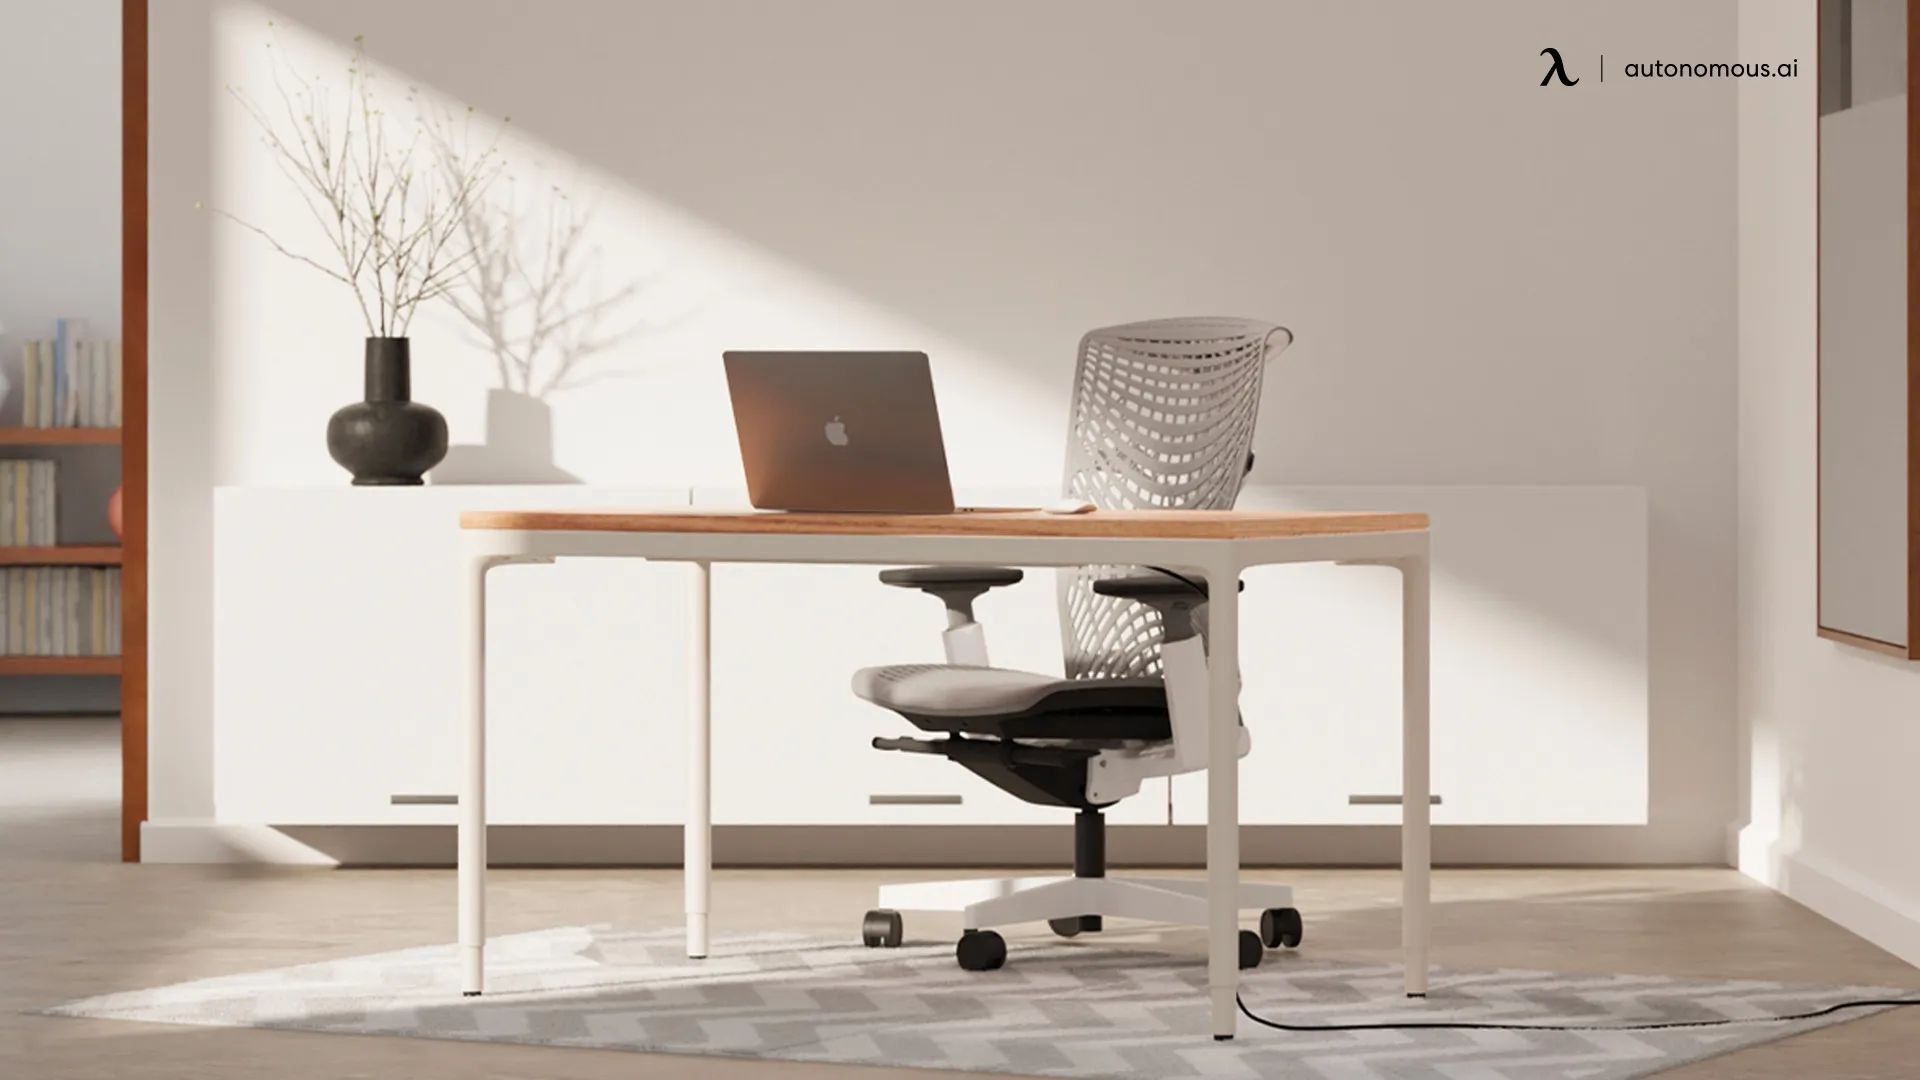 Features to Look for in Budget-Friendly Office Furniture